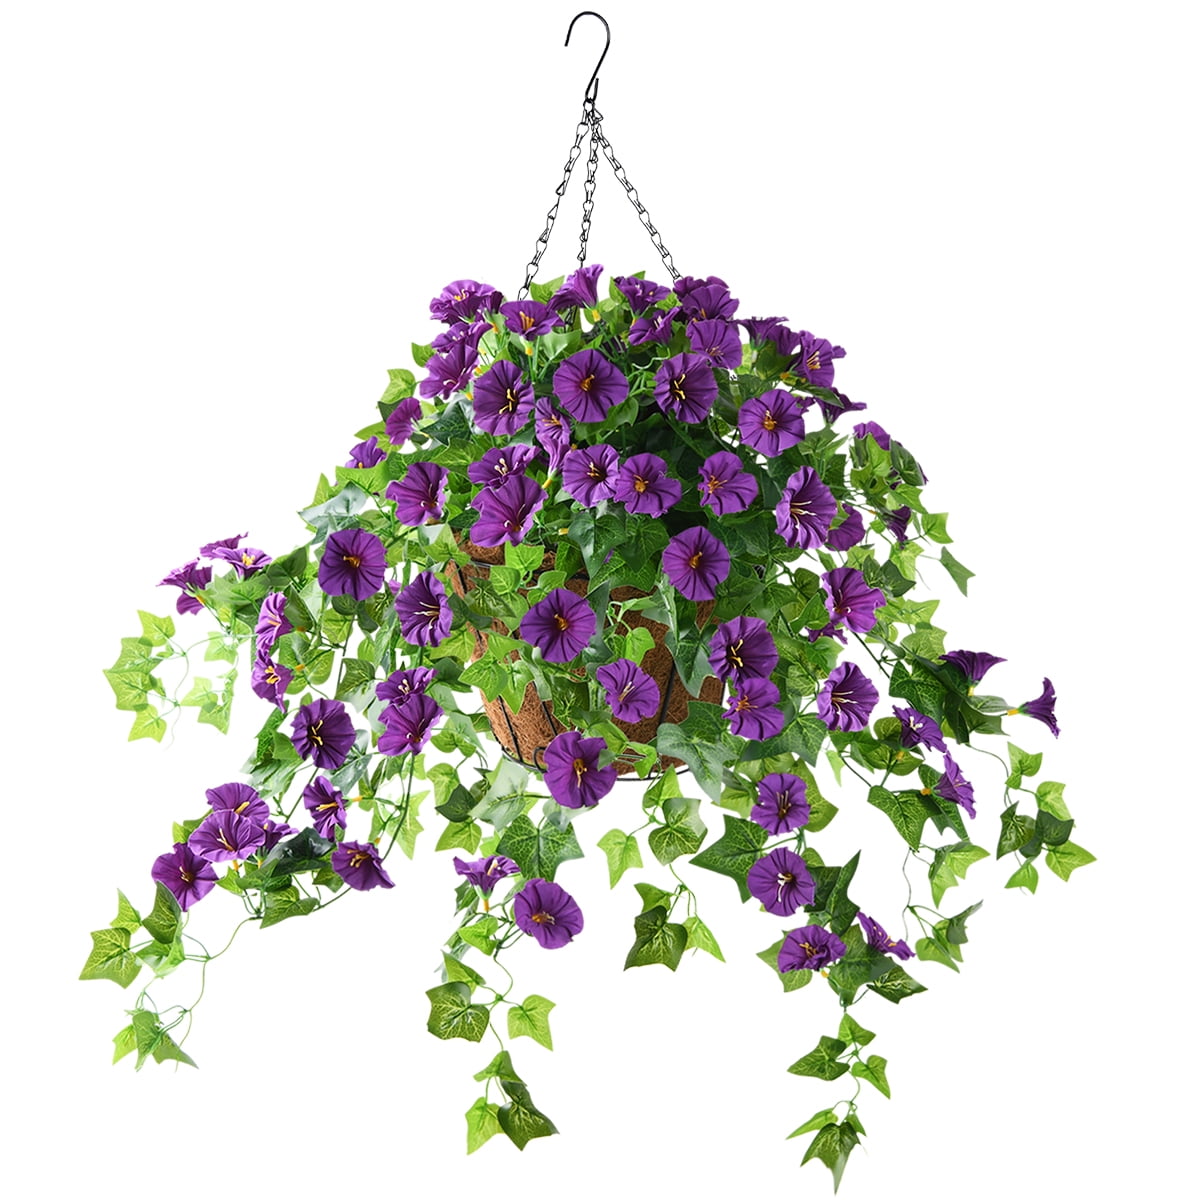 Artificial Hanging Flowers in Basket,Lvy Basket with Artificial Morning ...